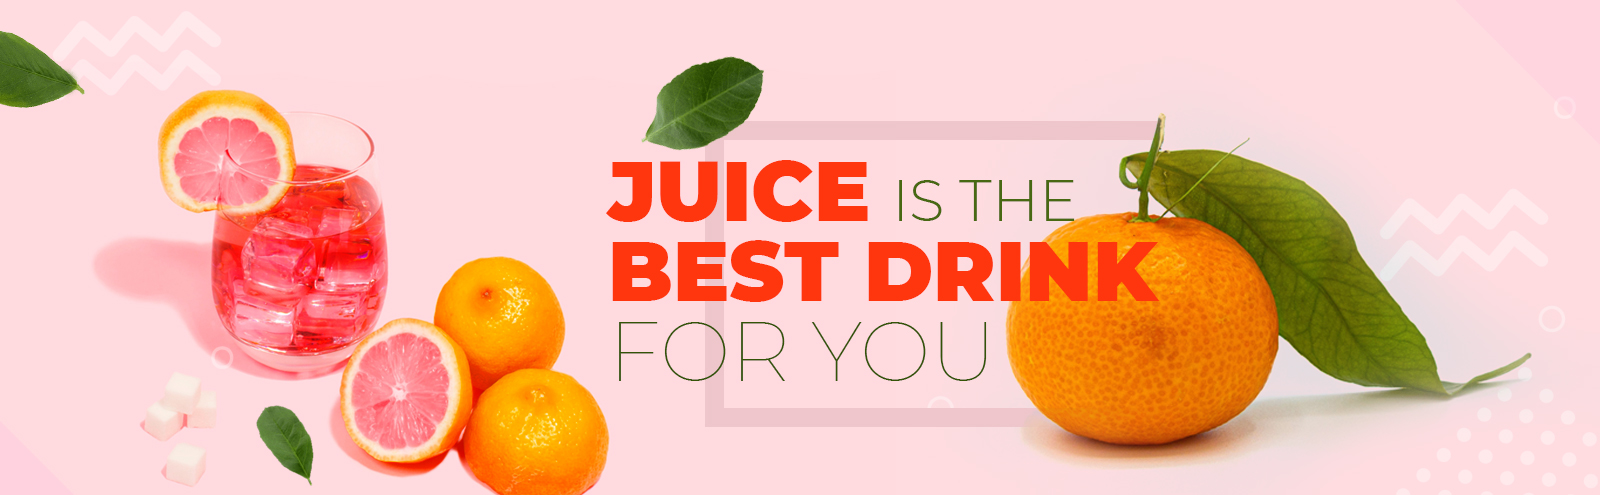 Juice Is The Best Drink For You